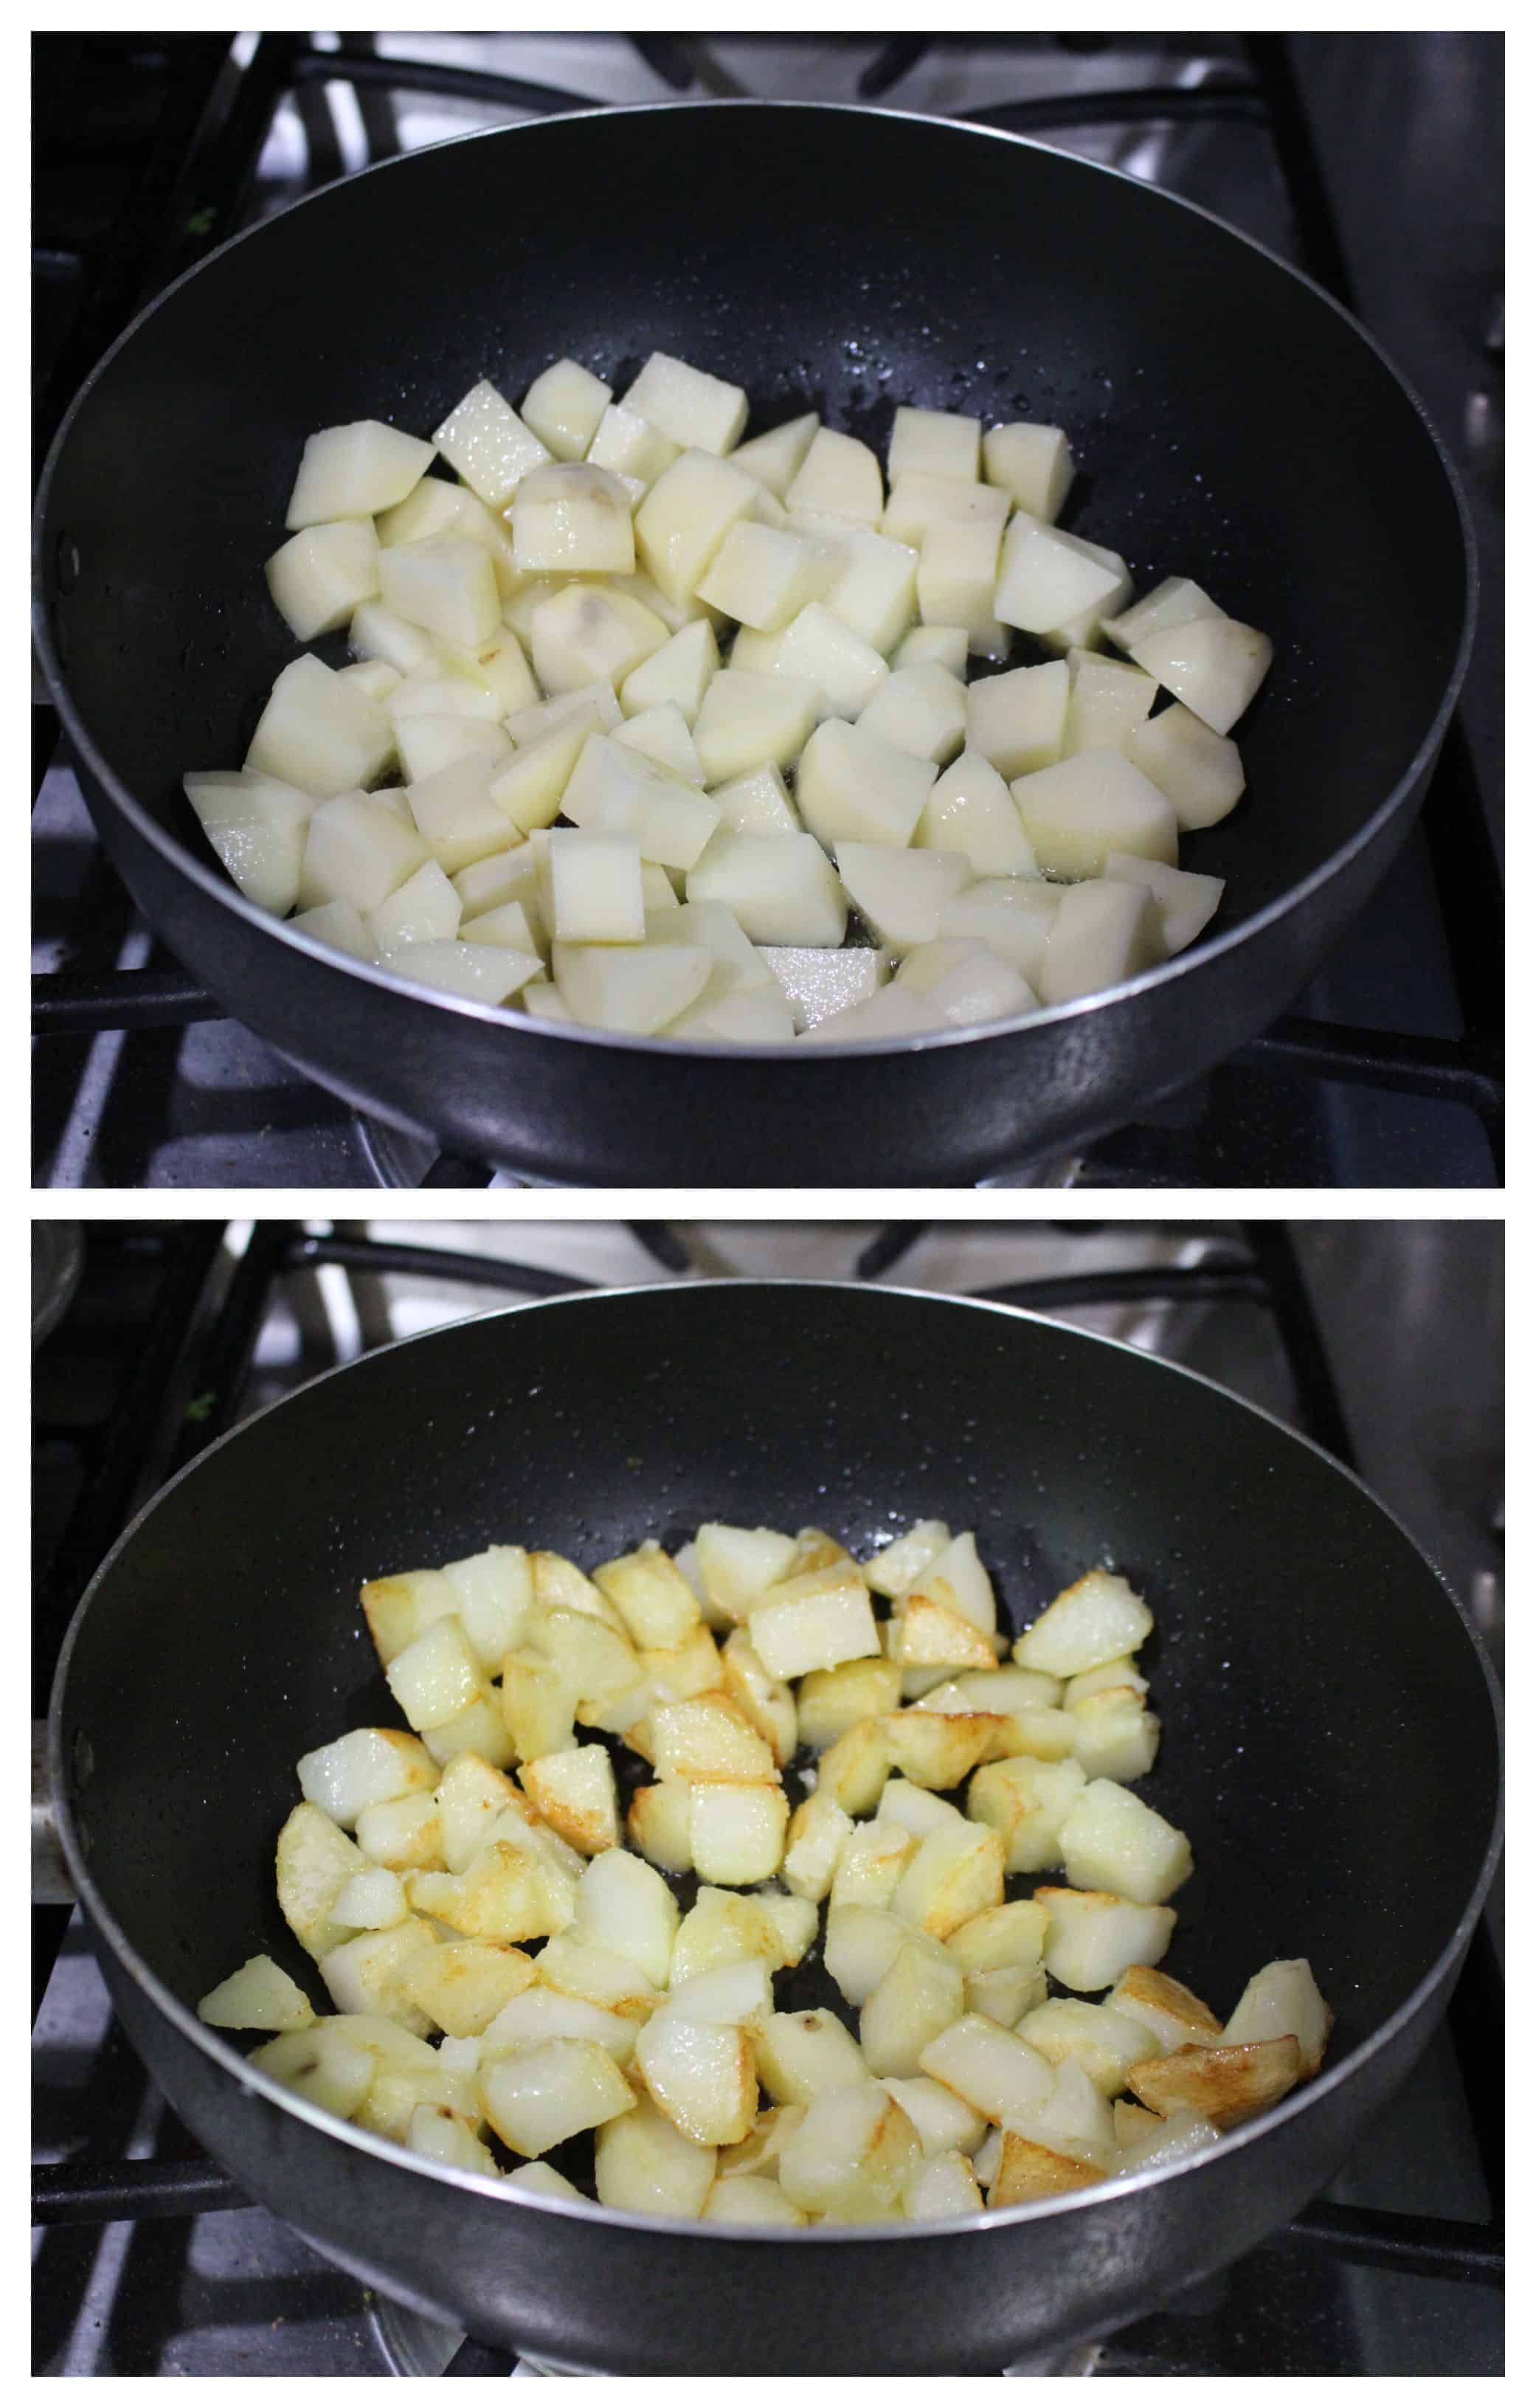 Frying the potato for curry